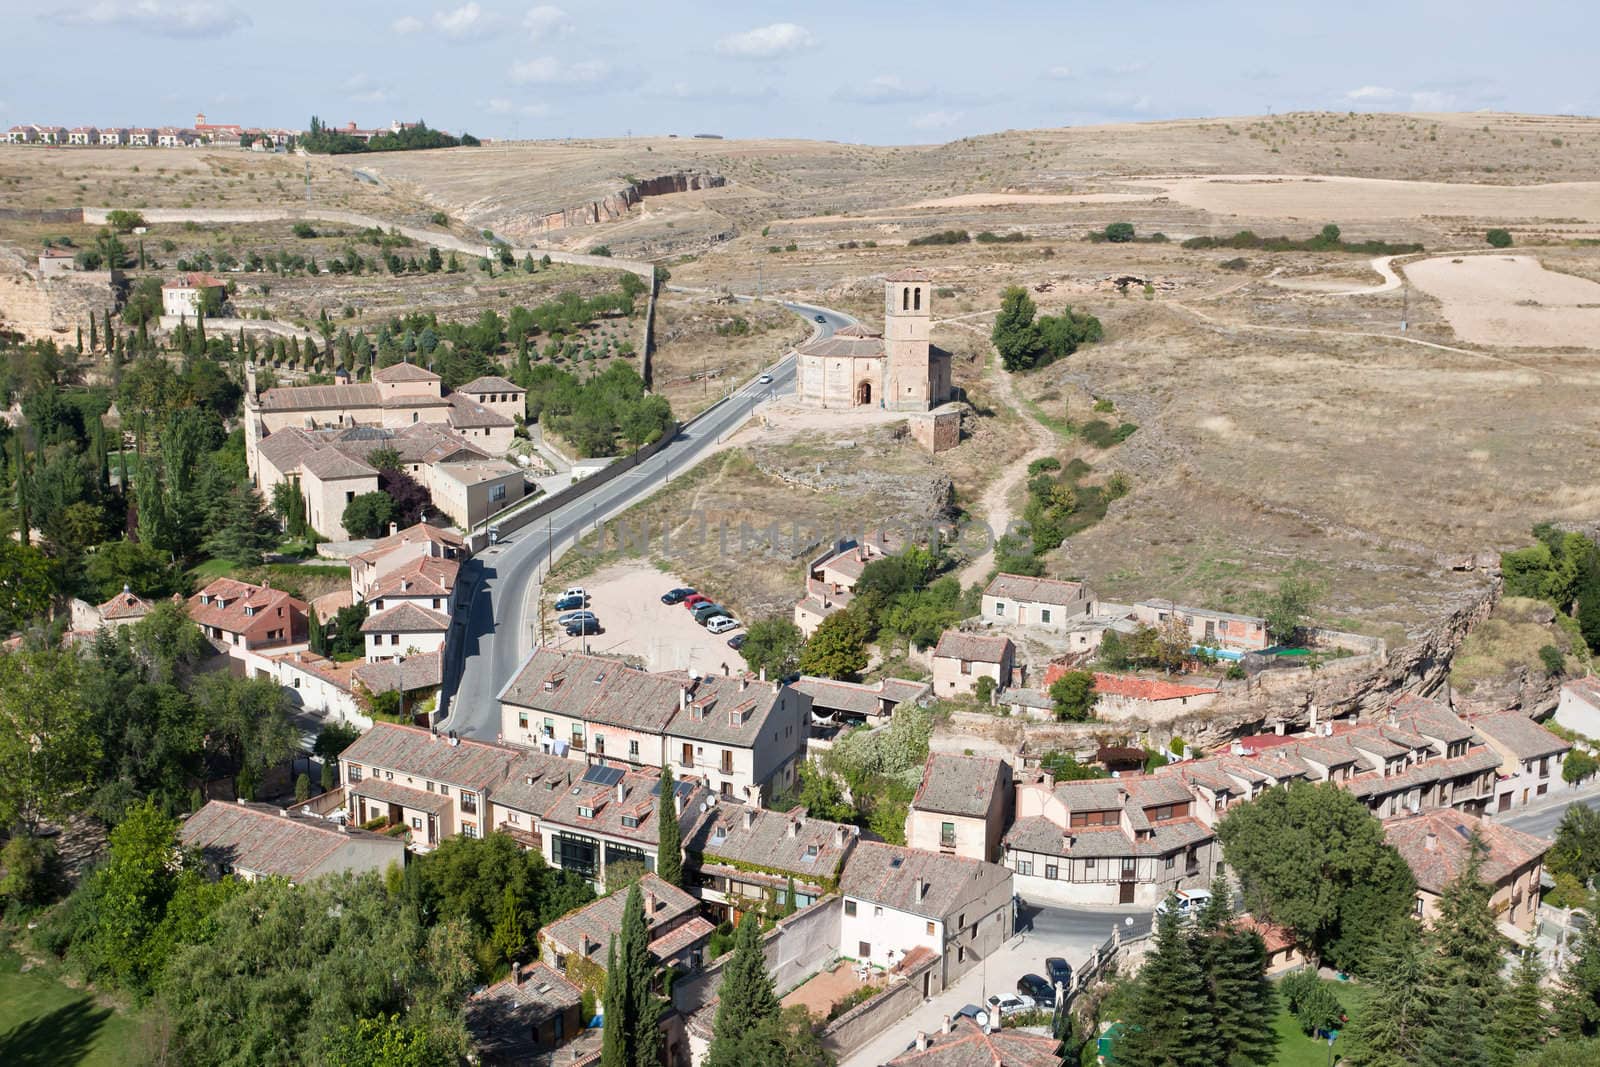 A general view of Segovia countryside by gary718